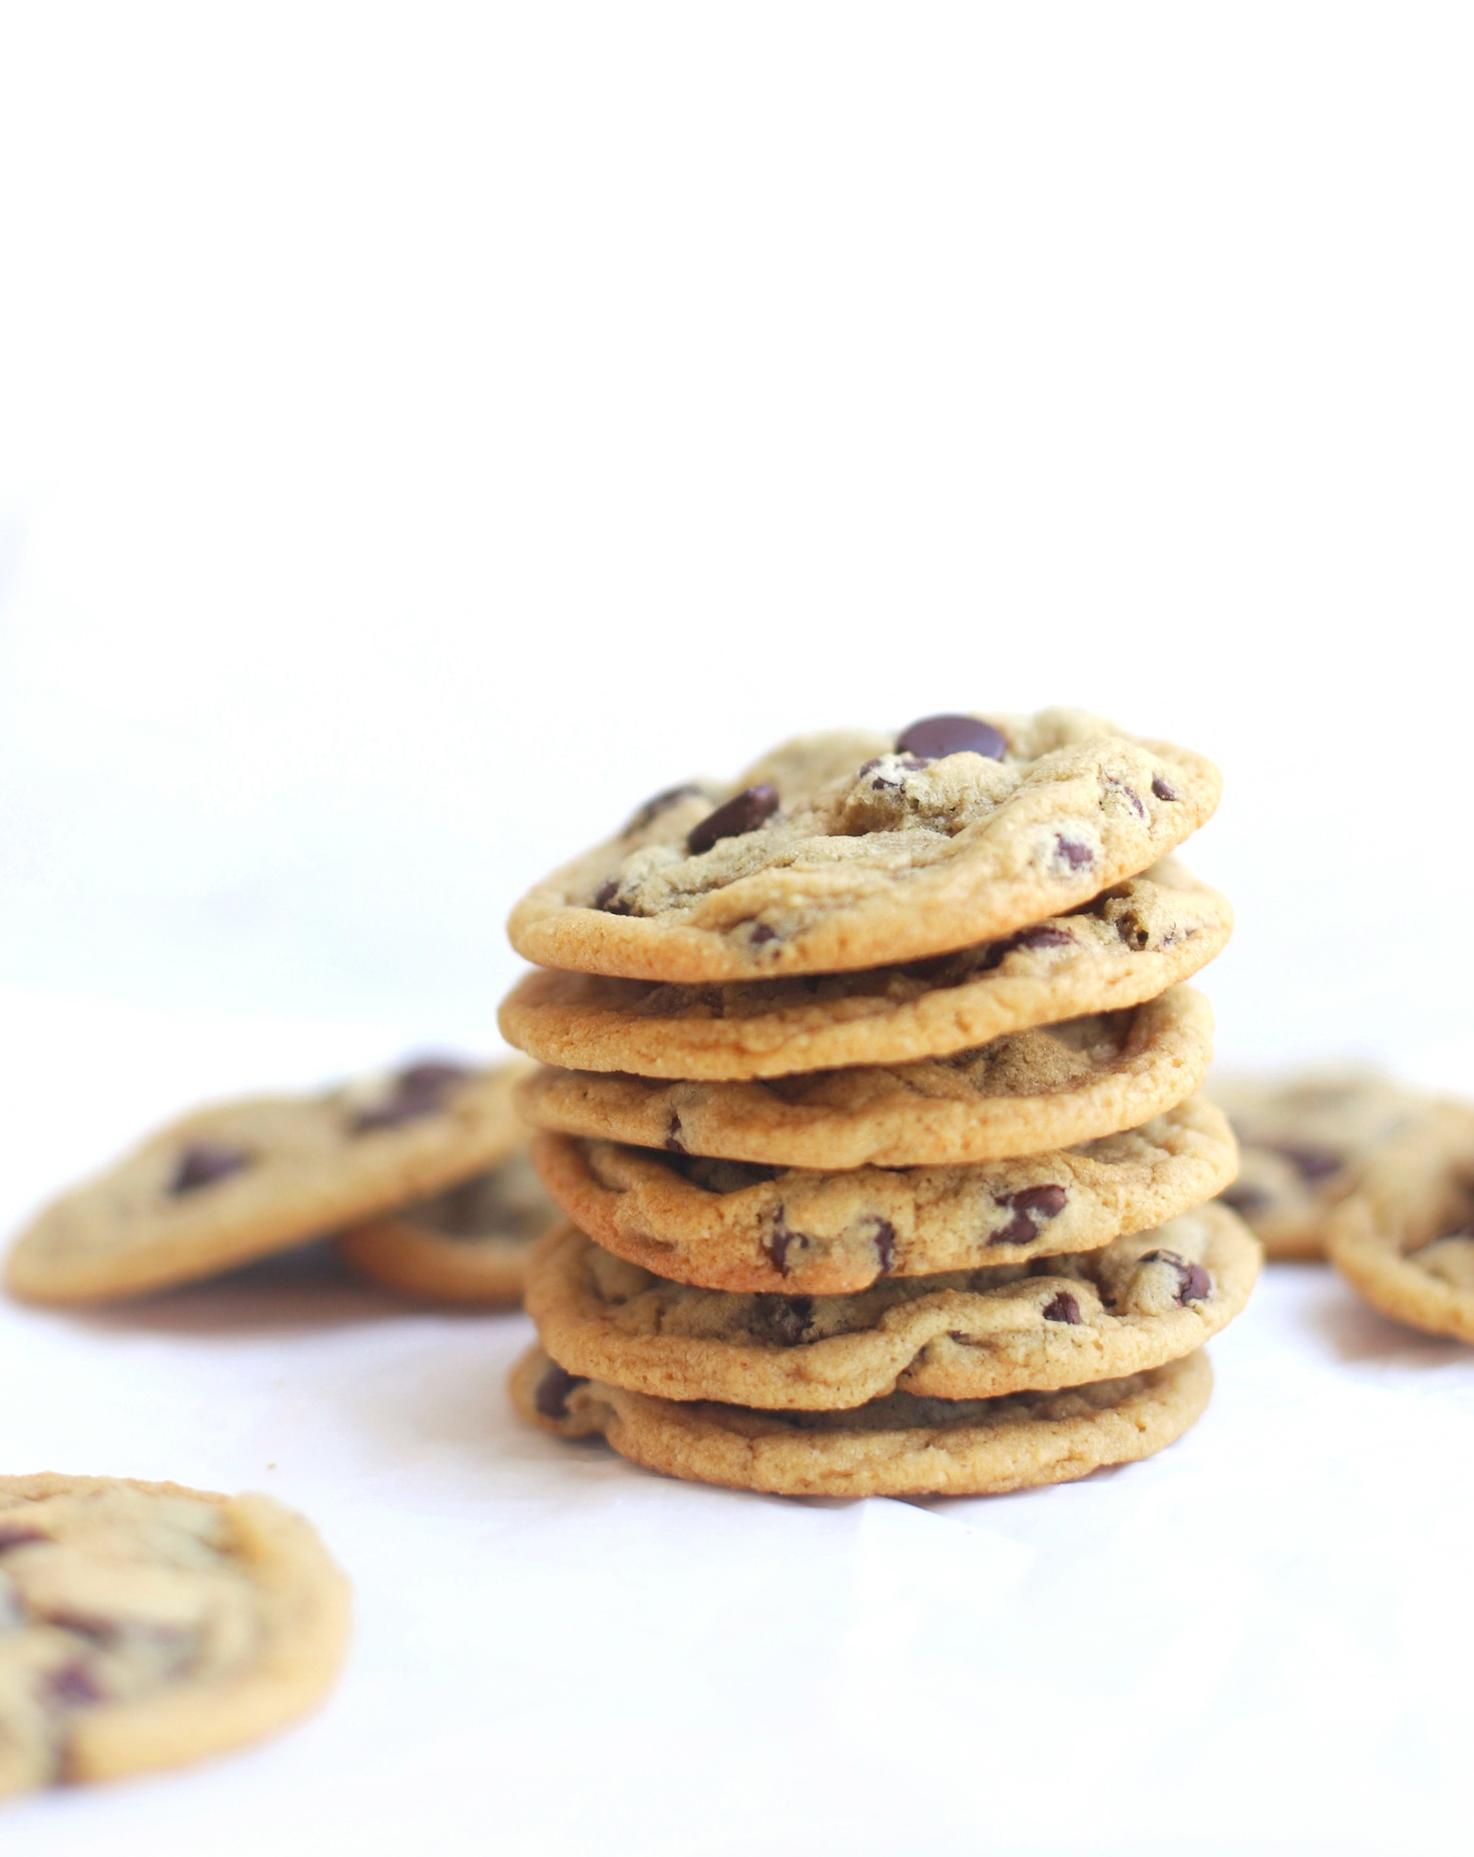  These cookies are so delicious, you won't believe they're gluten-free! 🙌